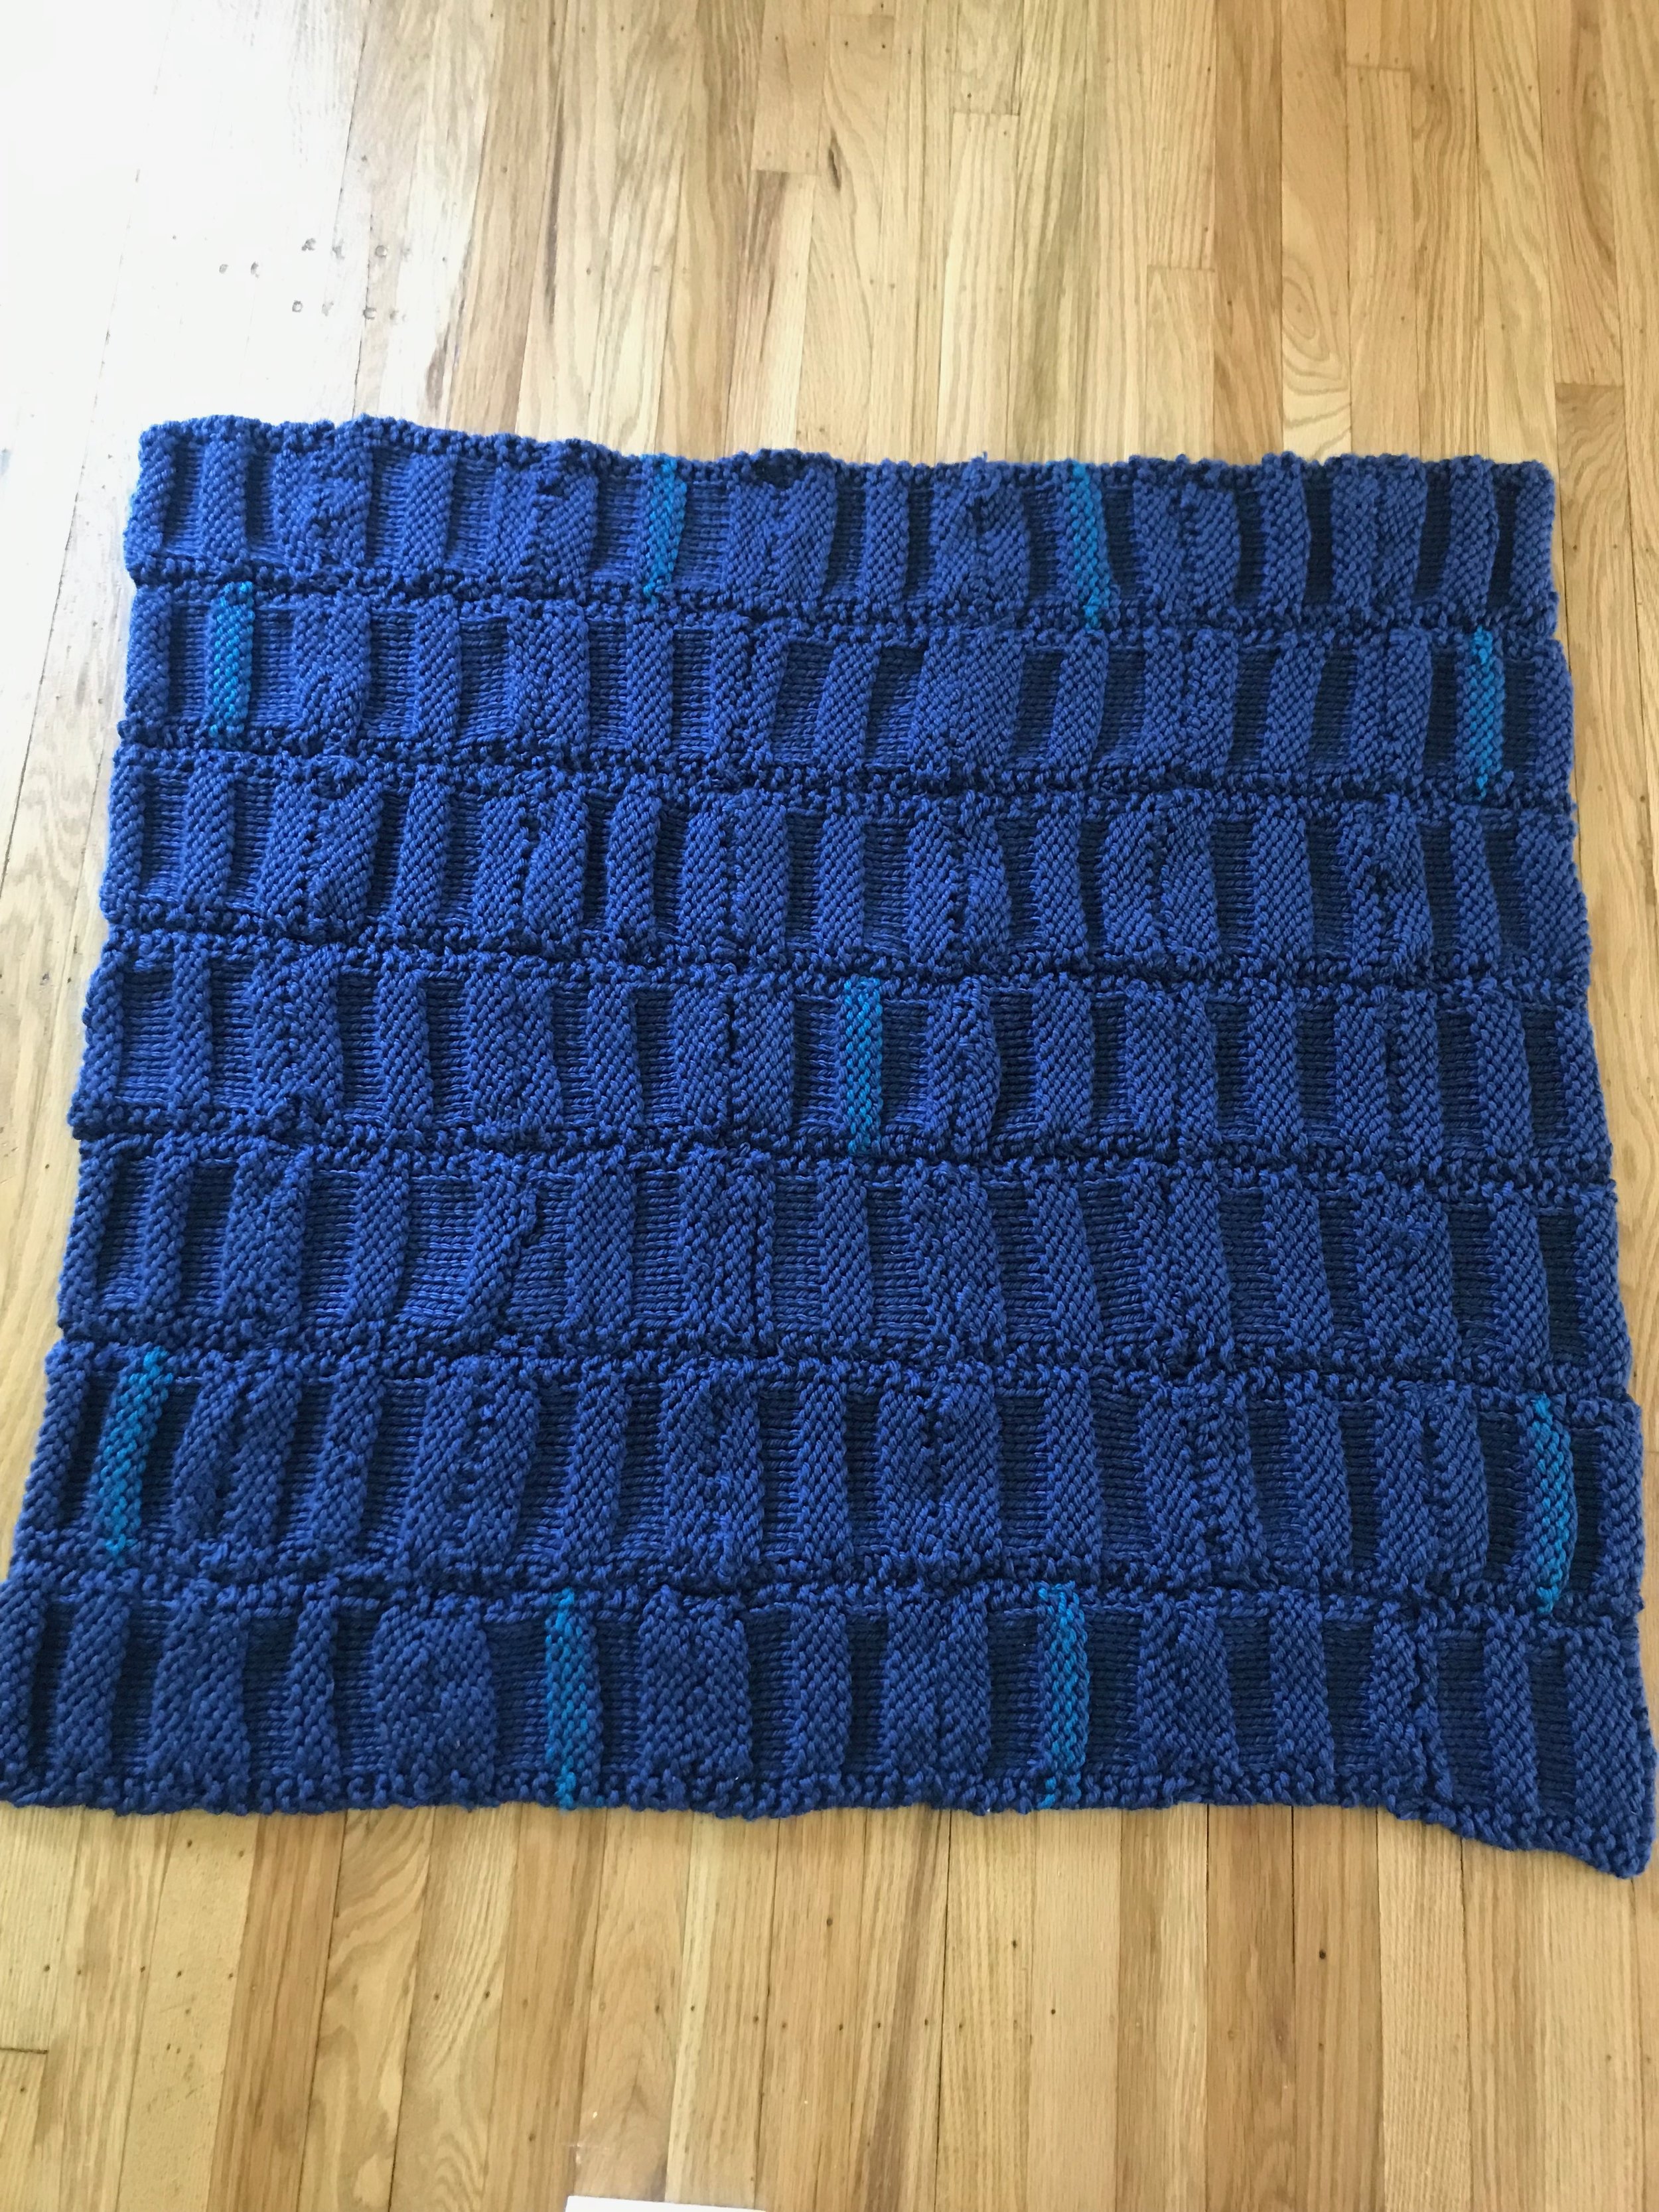 Gallery — Welcome Blanket